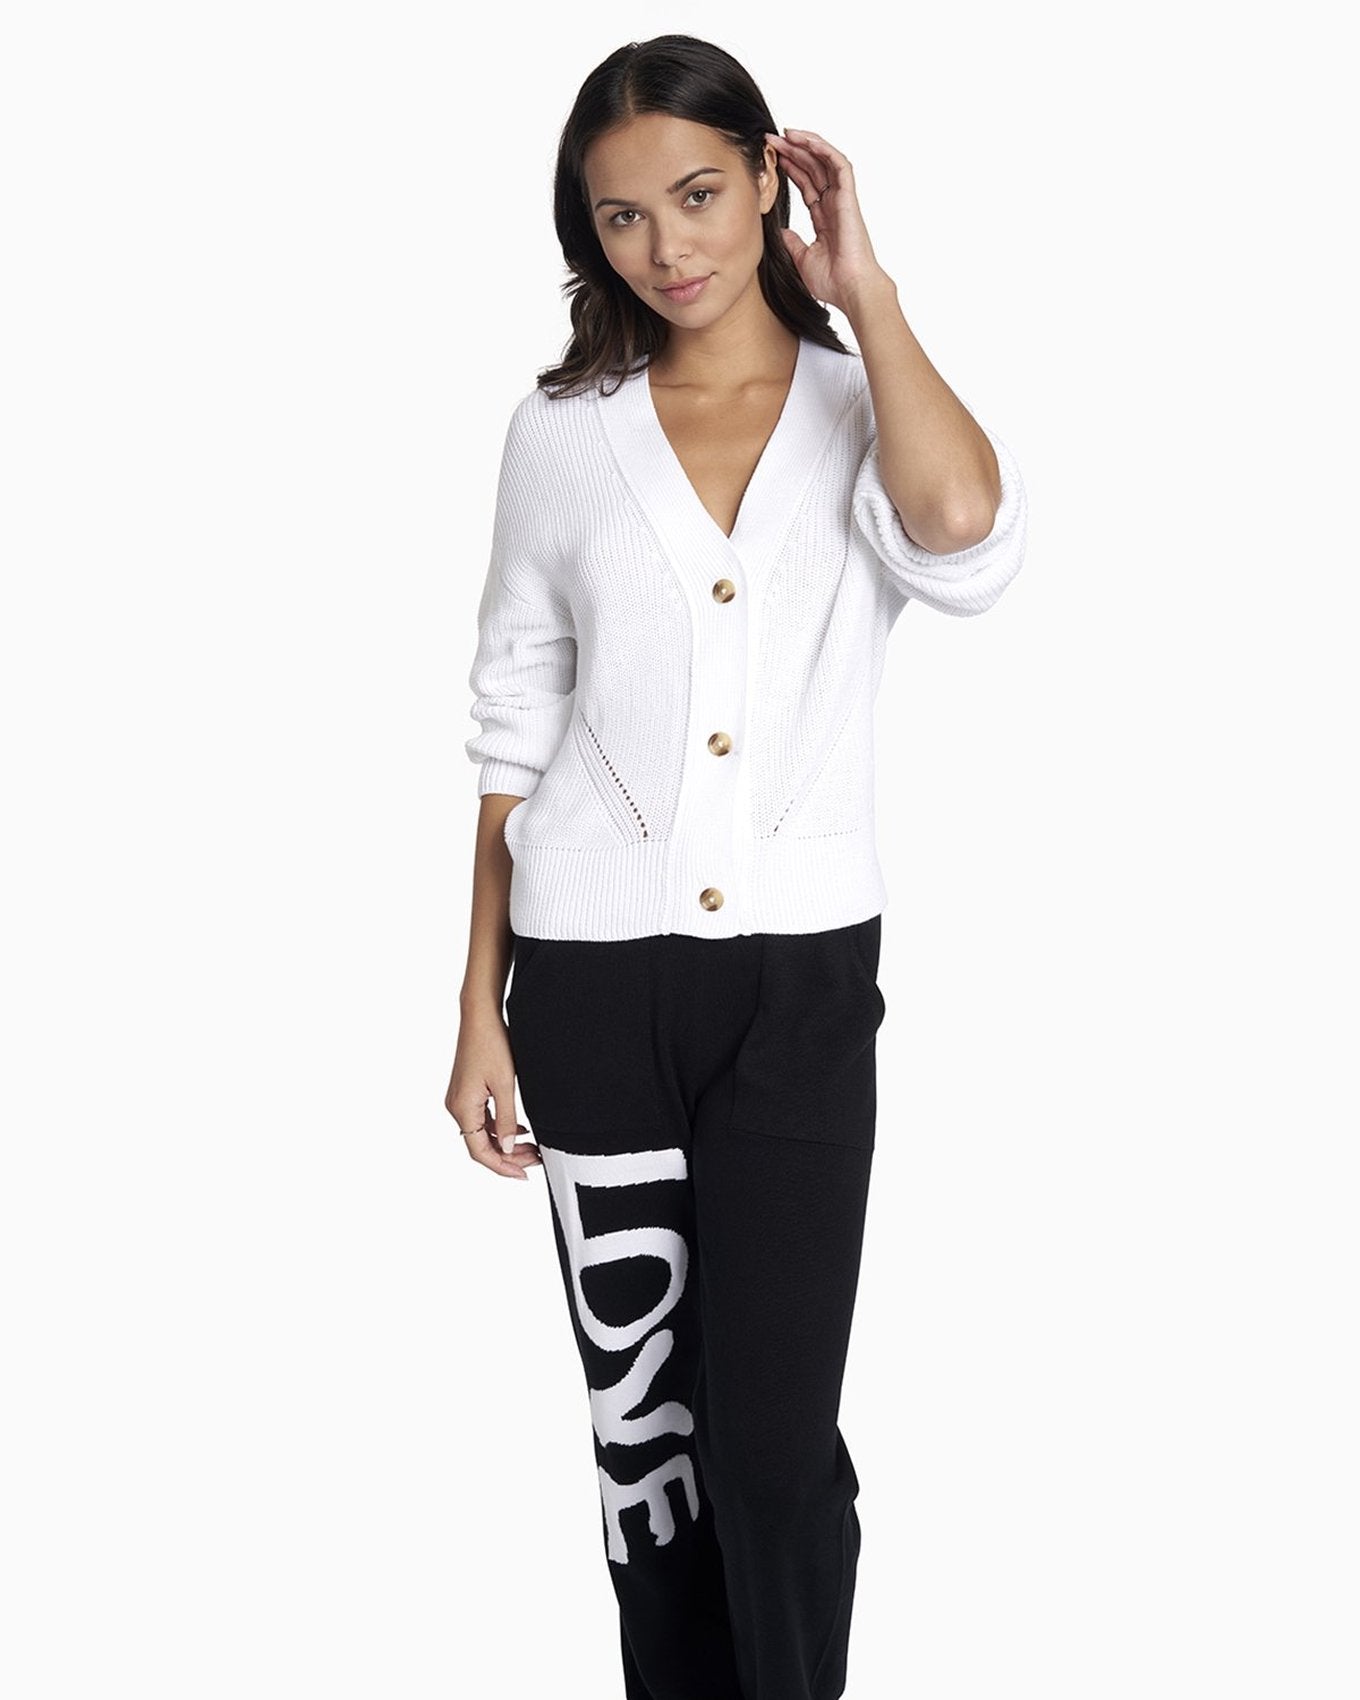 YesAnd Organic Knit Pant Knit Pant in color White Love on Black and shape pants